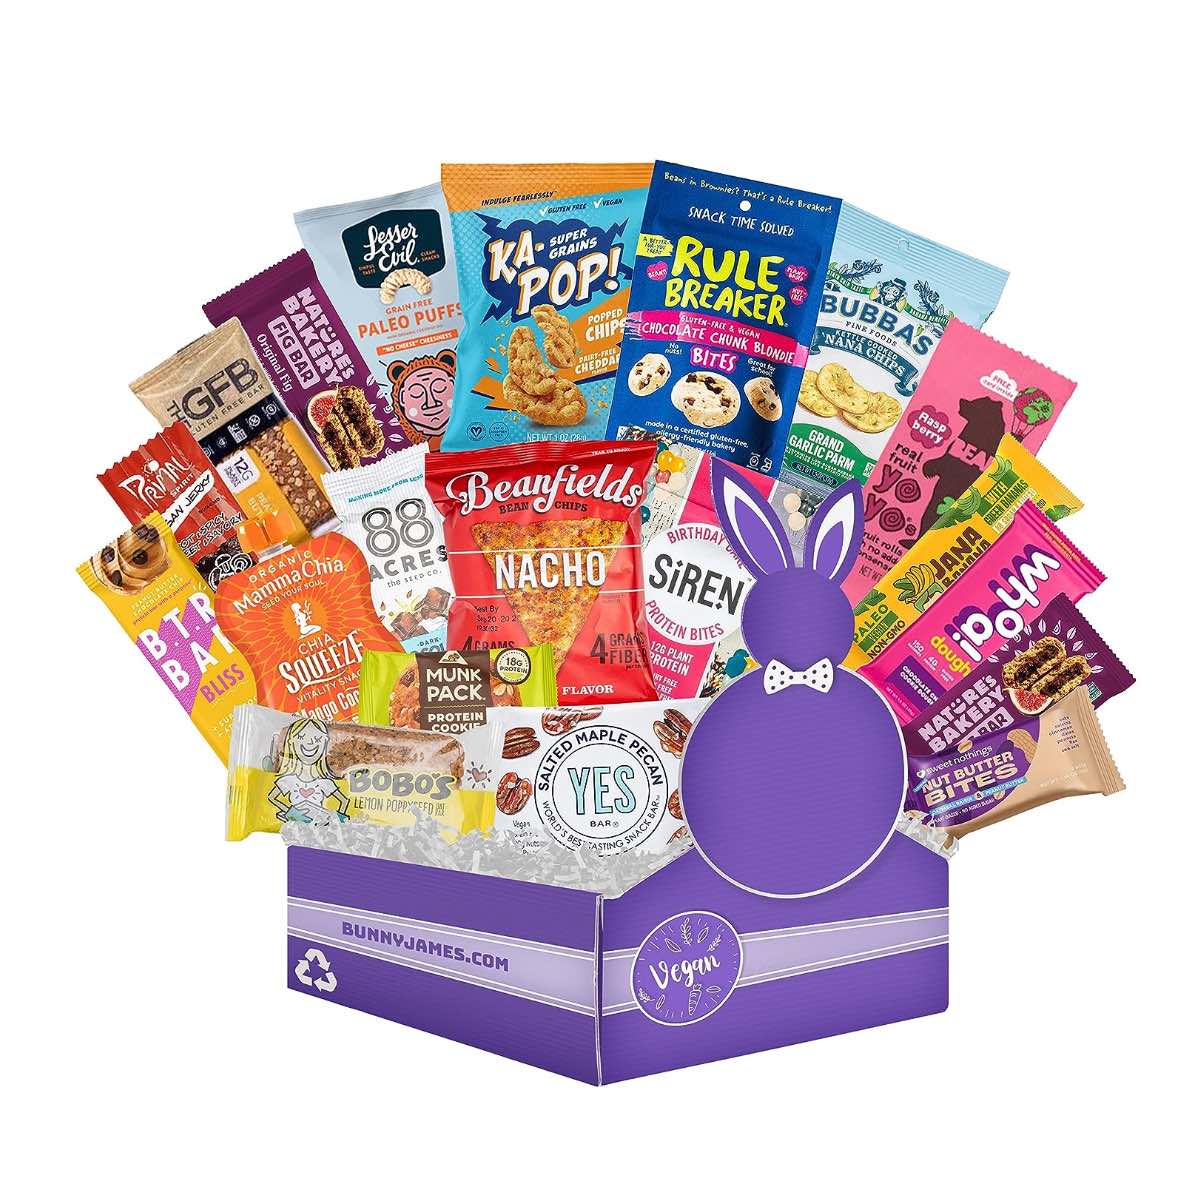 A purple box filled with dozens of vegan snacks as a gift basket.